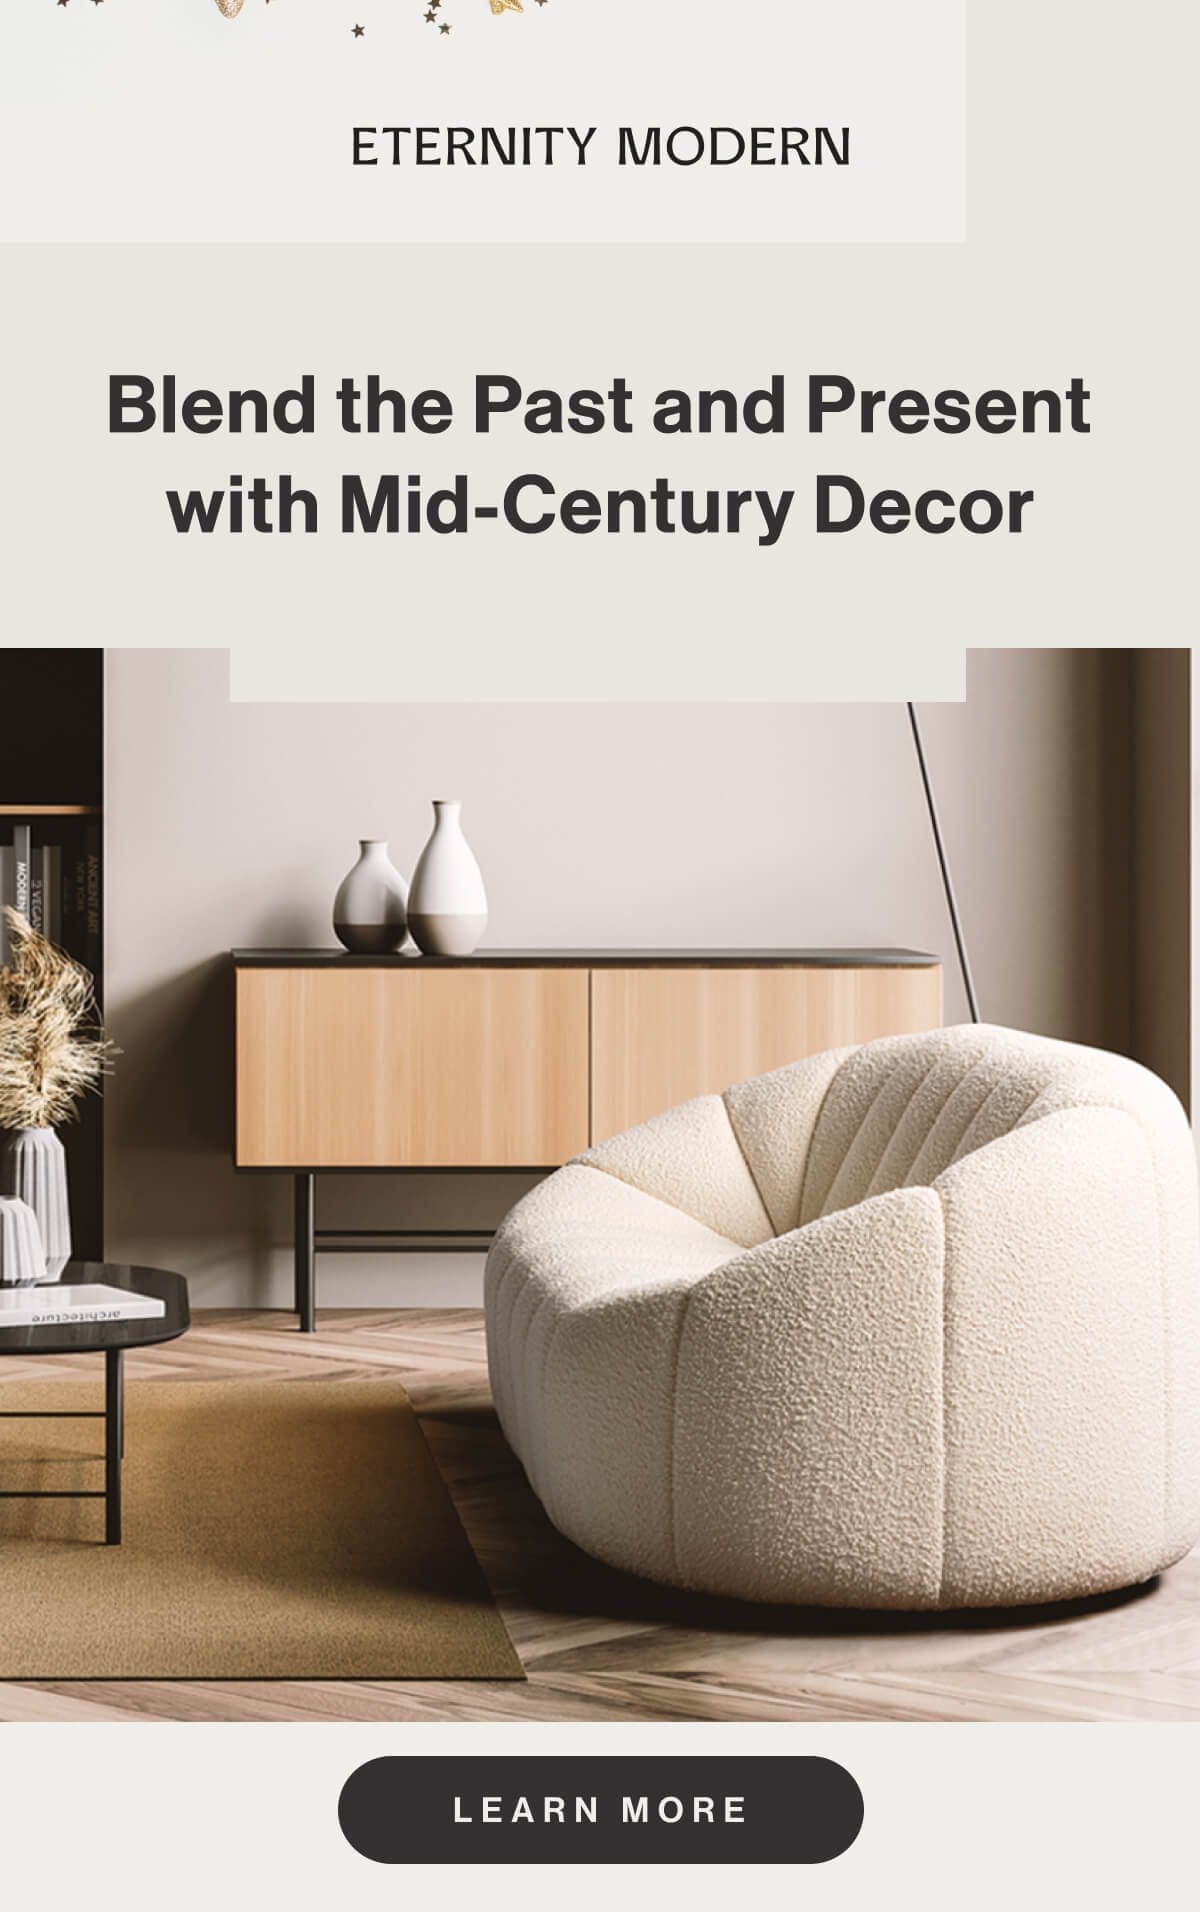 Blend the Past and Present with Mid-Century Decor - Learn More